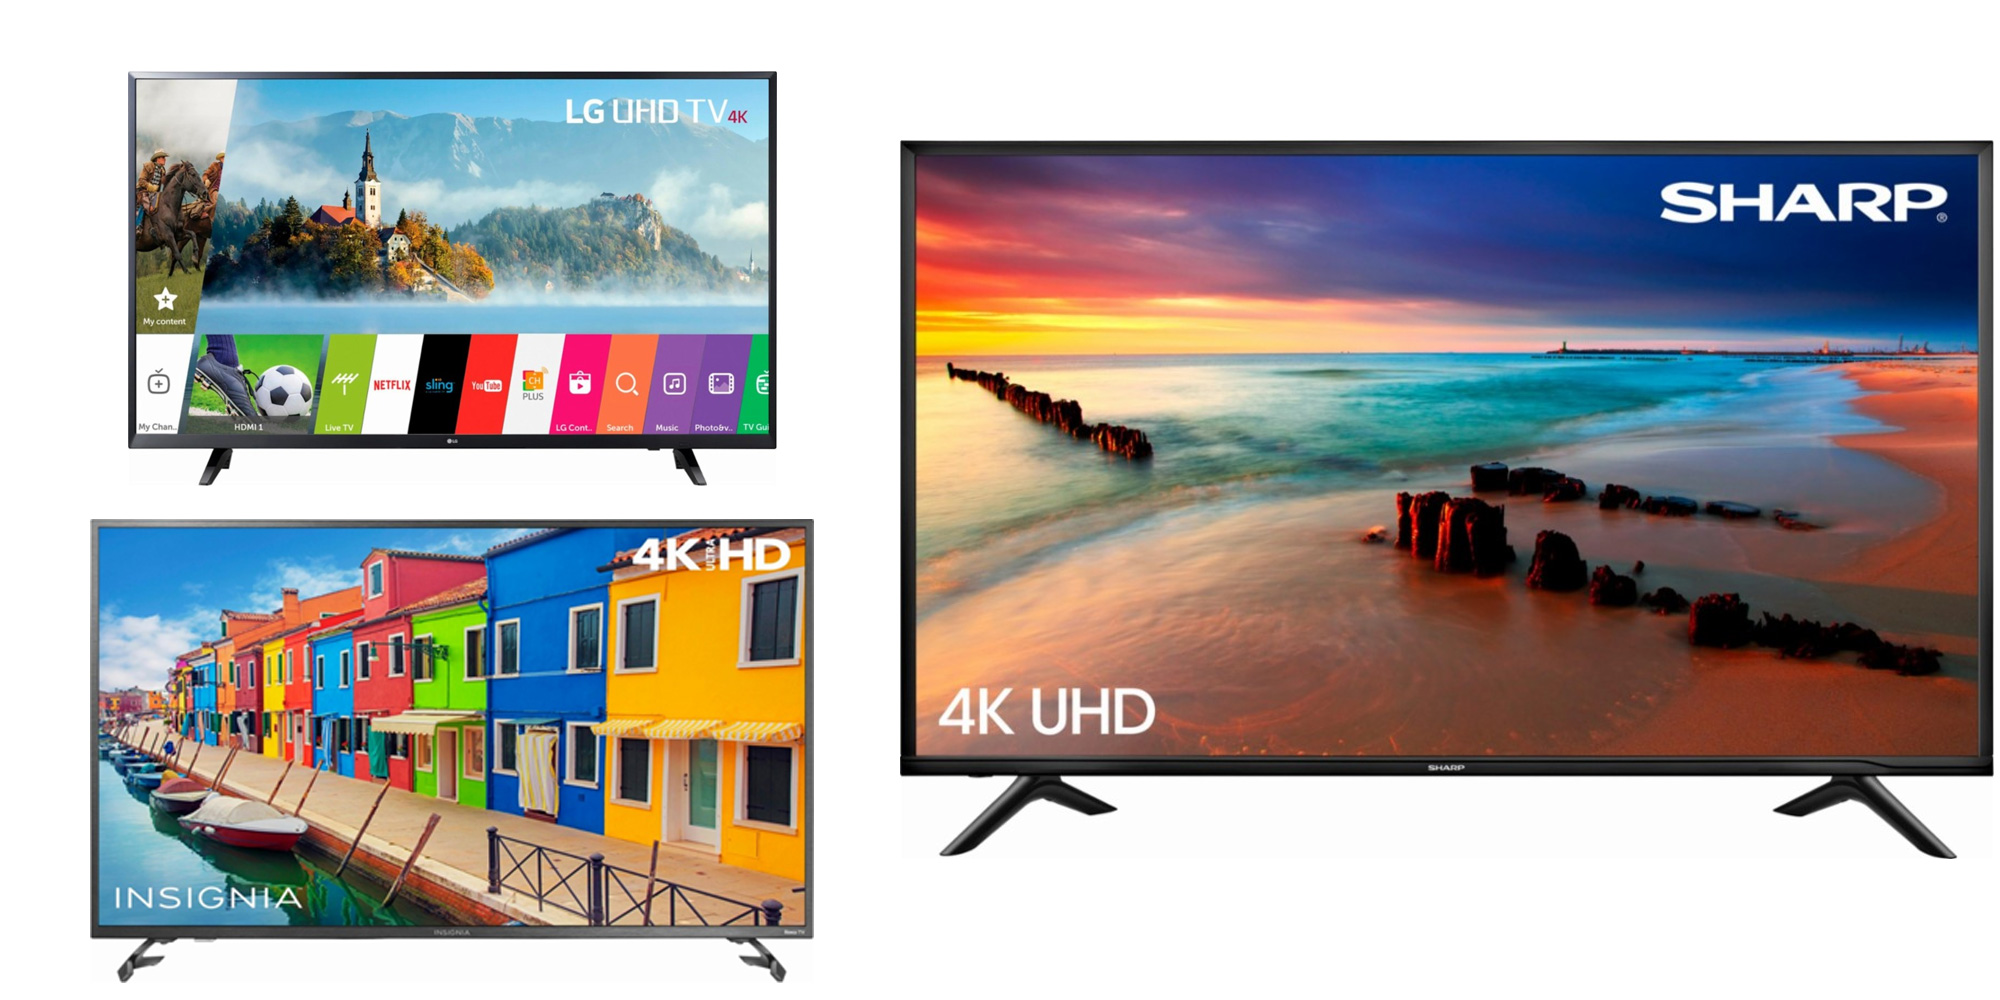 Upgrade your TV to 4K with early Black Friday deals from $280 - 9to5Toys